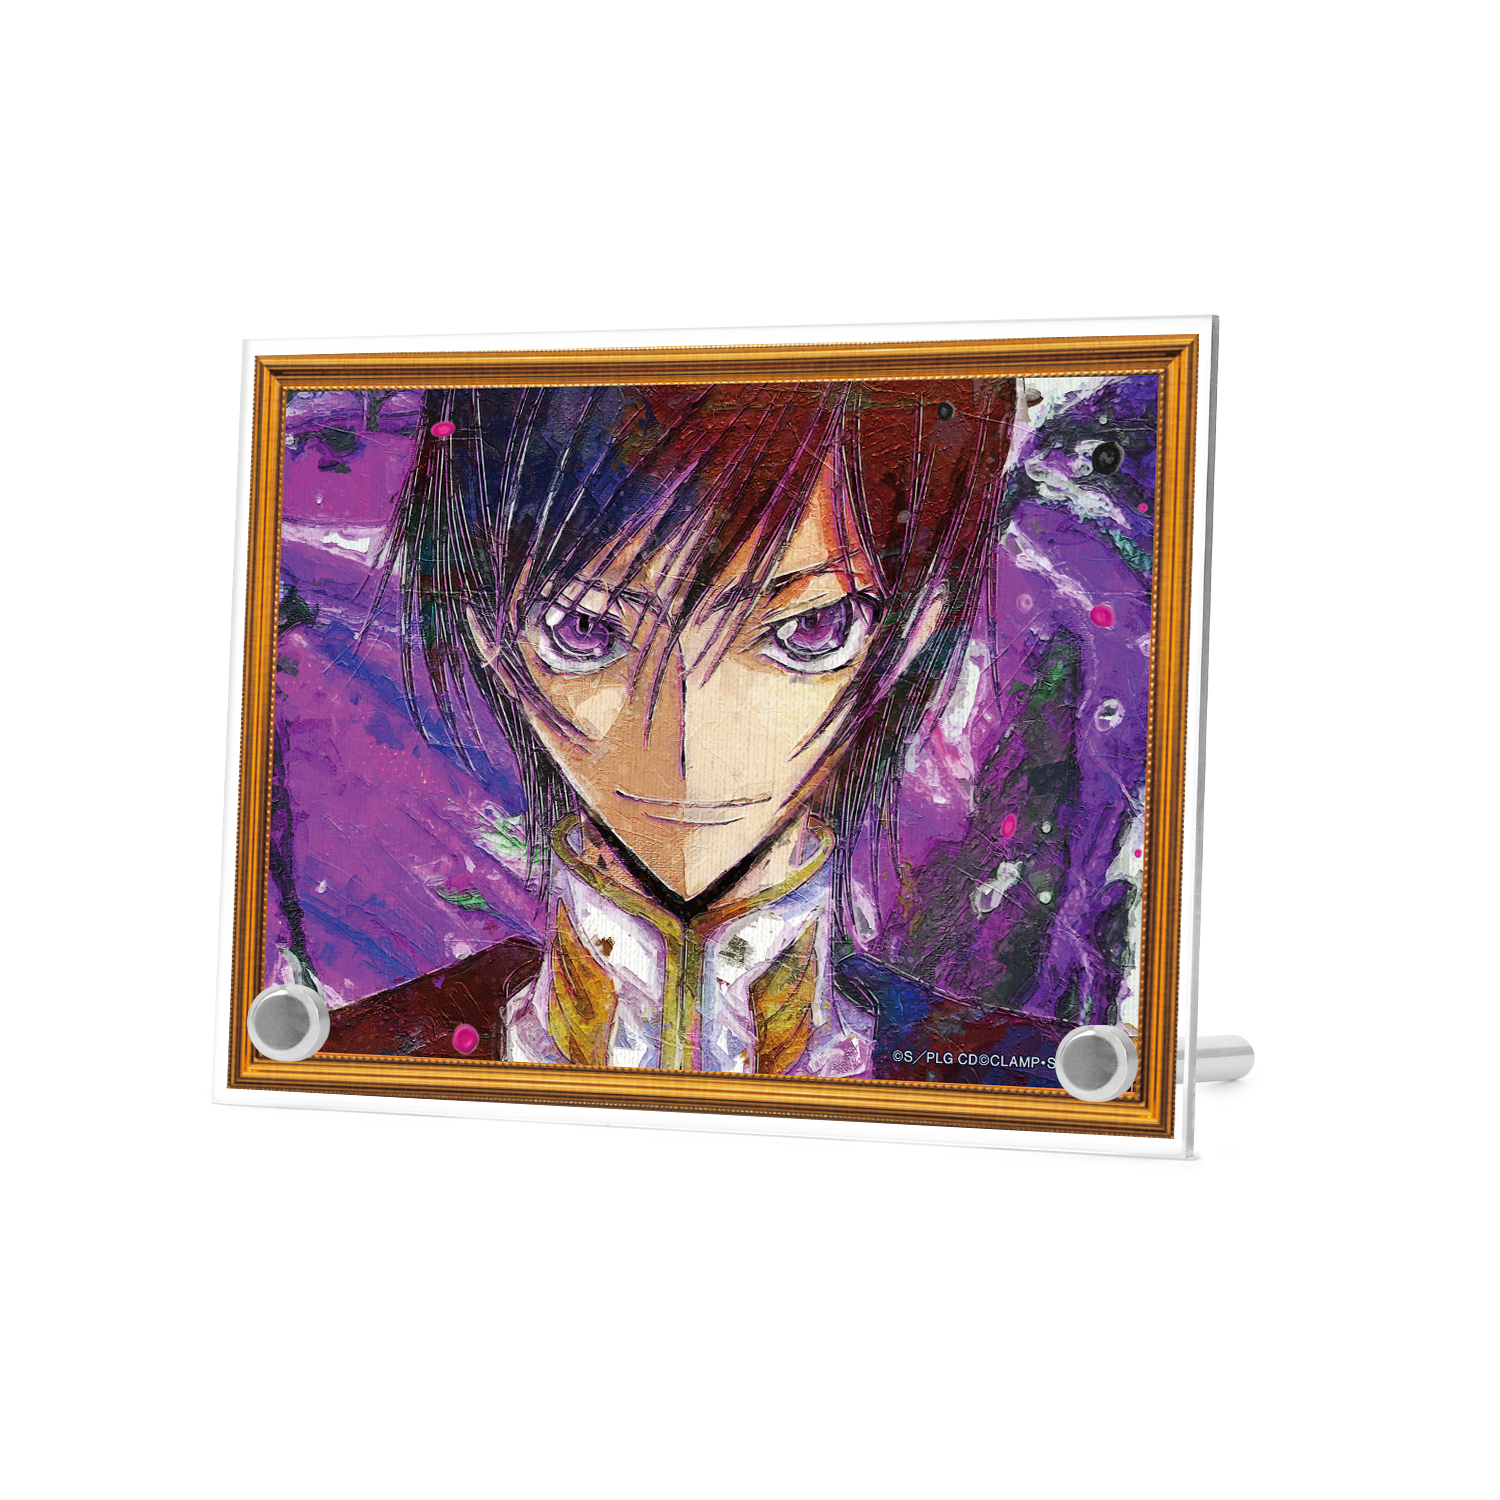 [Pre-order] "Code Geass Lelouch of the Rebellion" Lelouch Grunge Canvas A6 Acrylic Panel Ver. E